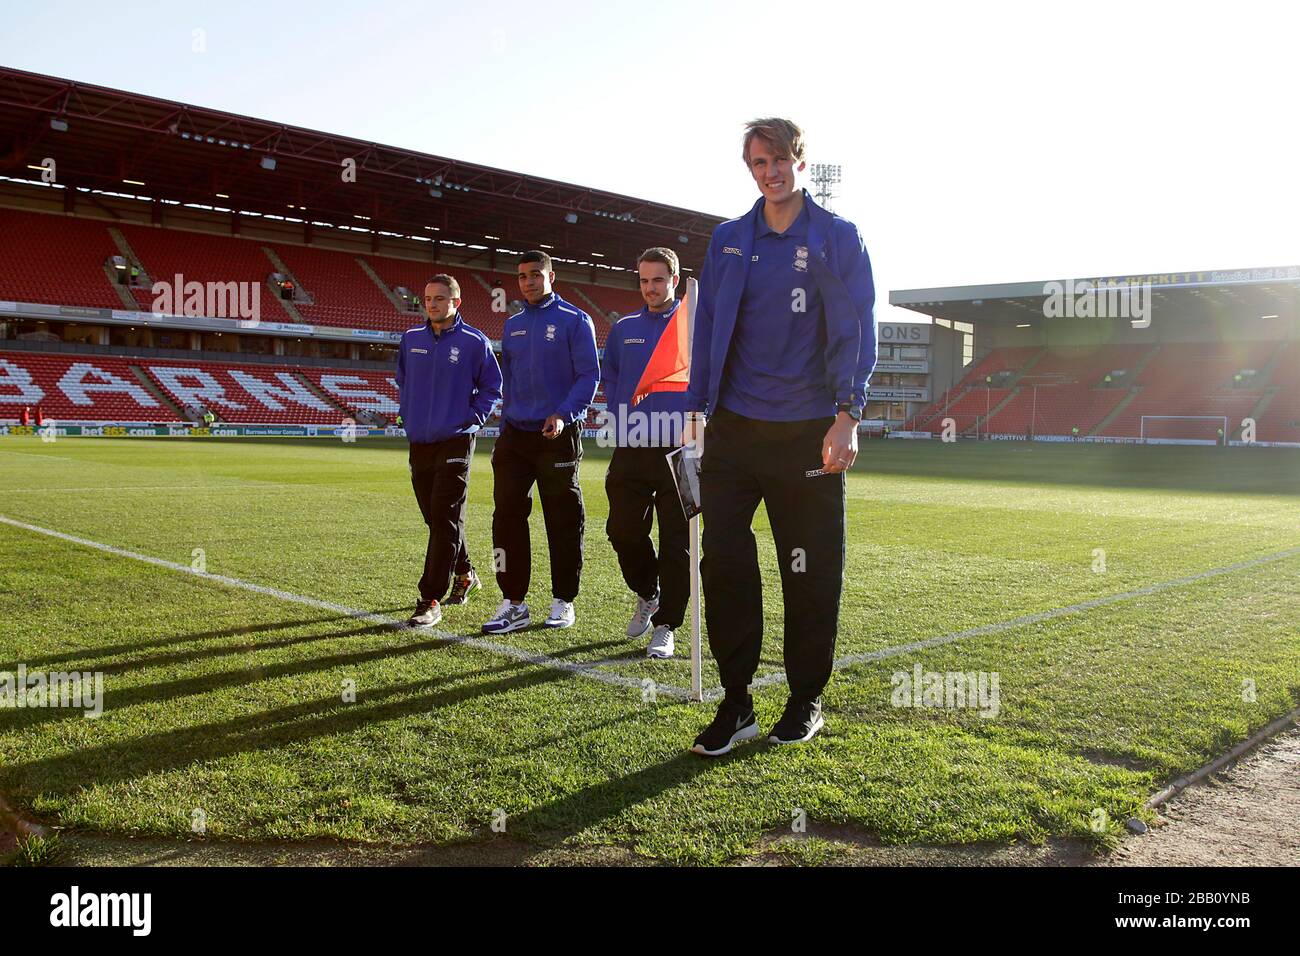 Birmingham City's Dariusz Dudka, Tom Adeyemi, Andrew Shinnie and Dan Burn (left to right) on a pitch walk before the game at Oakwell Stock Photo